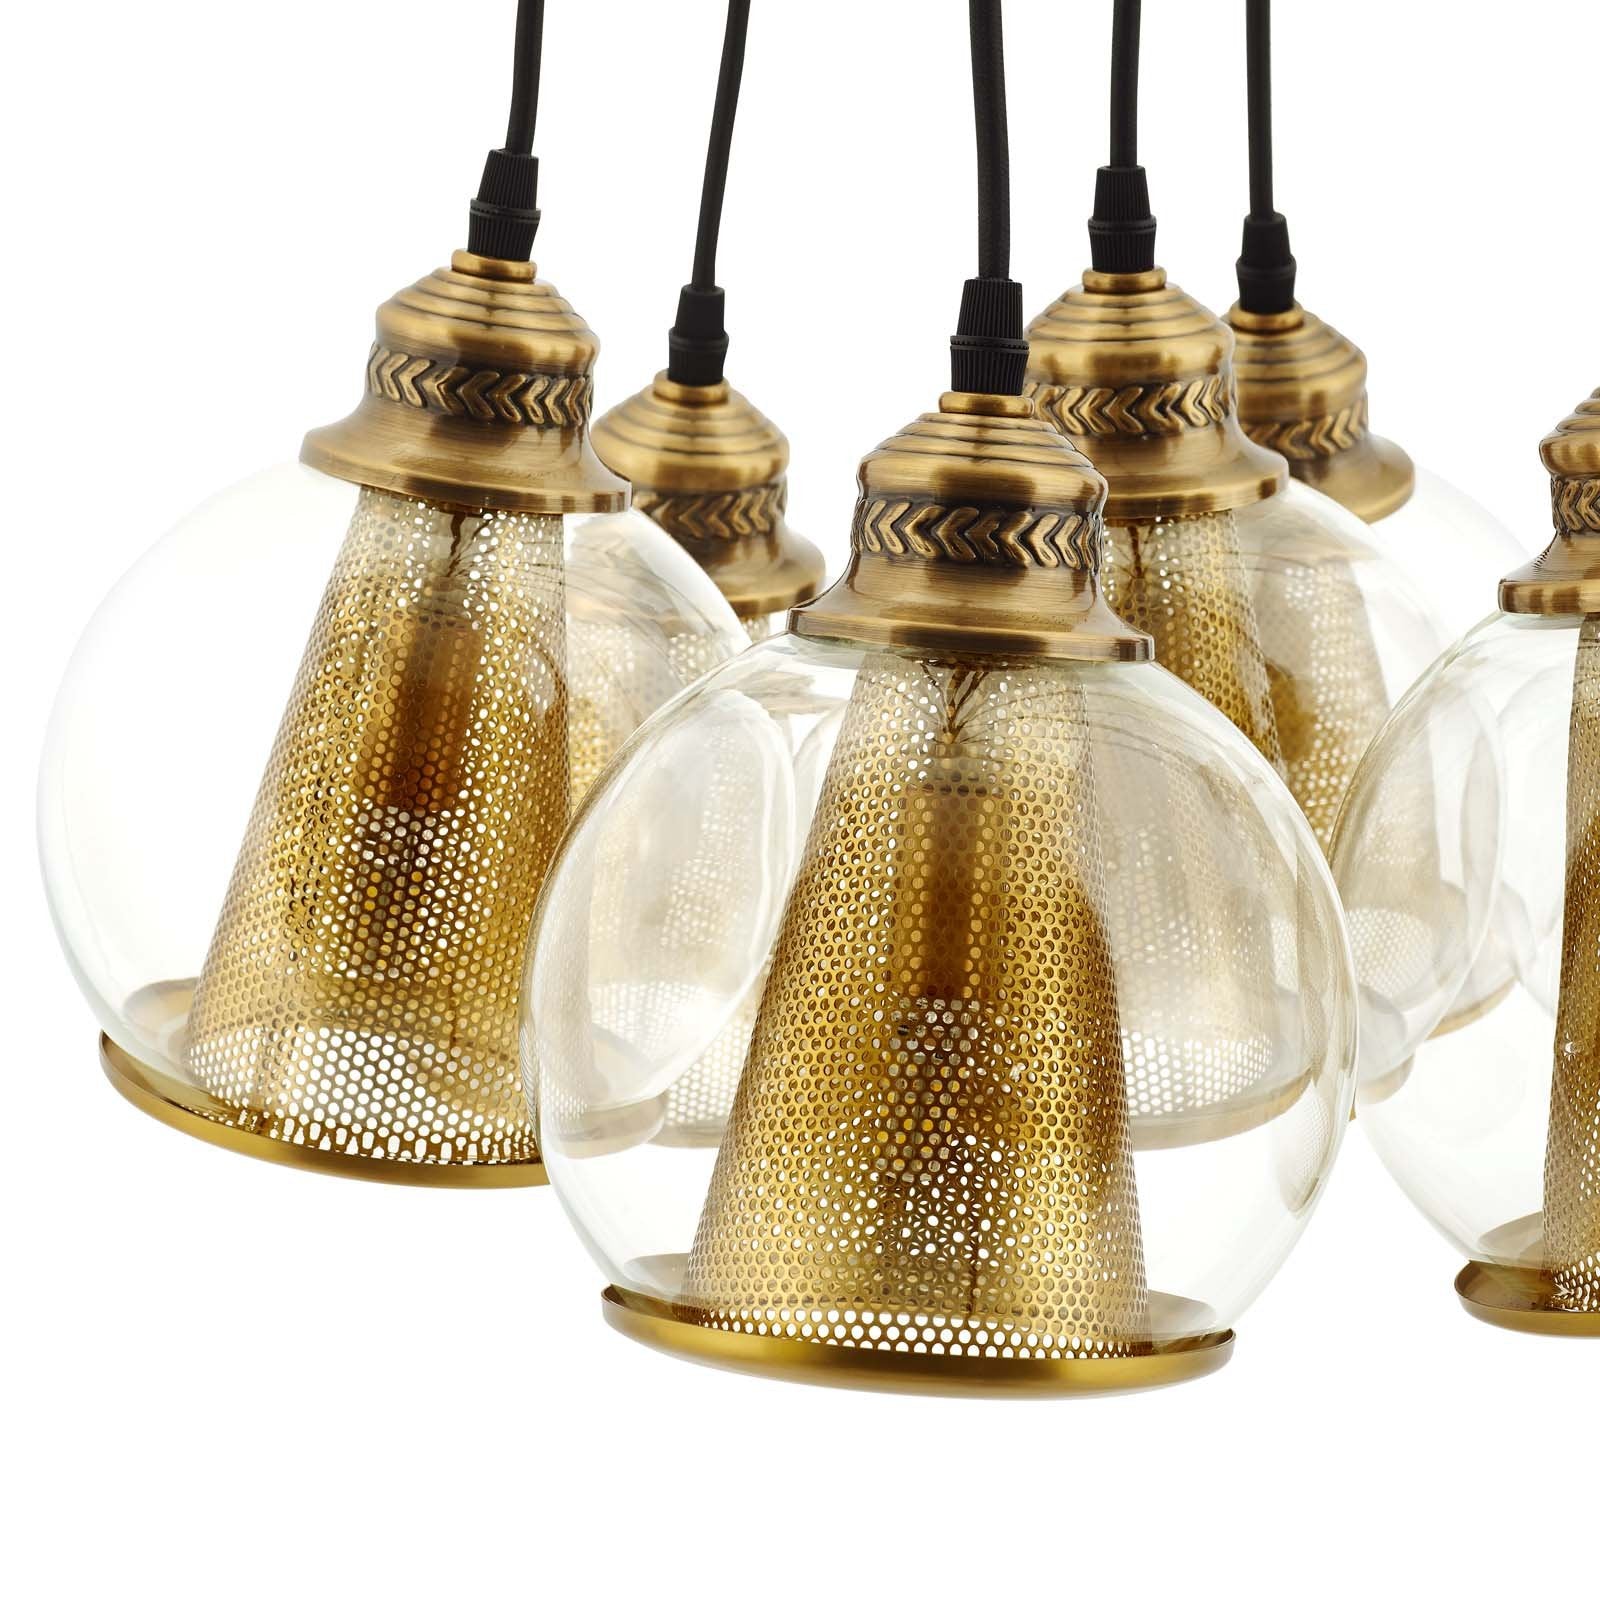 Peak Brass Cone and Glass Globe Cluster Pendant Chandelier - East Shore Modern Home Furnishings